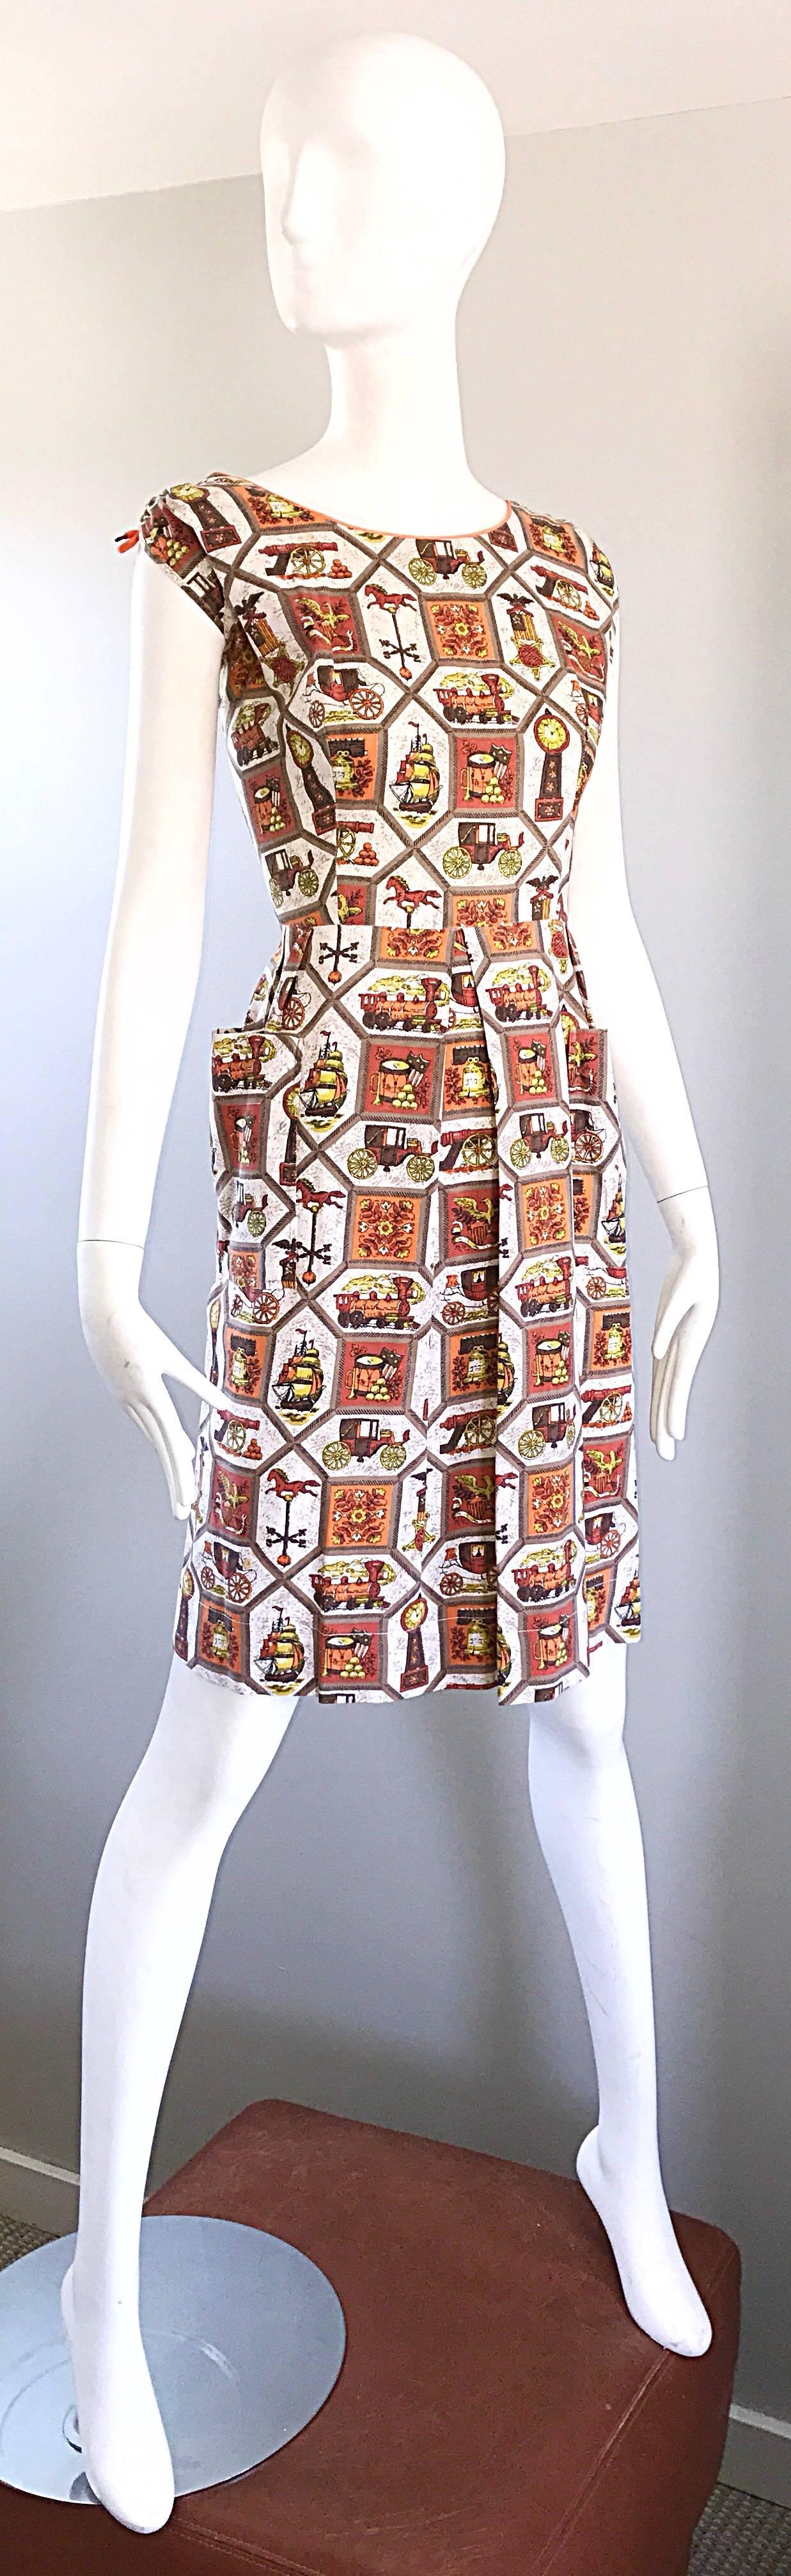 Rare 1950s Larger Plus Size Train + Horse + Carriage Novelty Print Vintage Dress In Excellent Condition For Sale In San Diego, CA